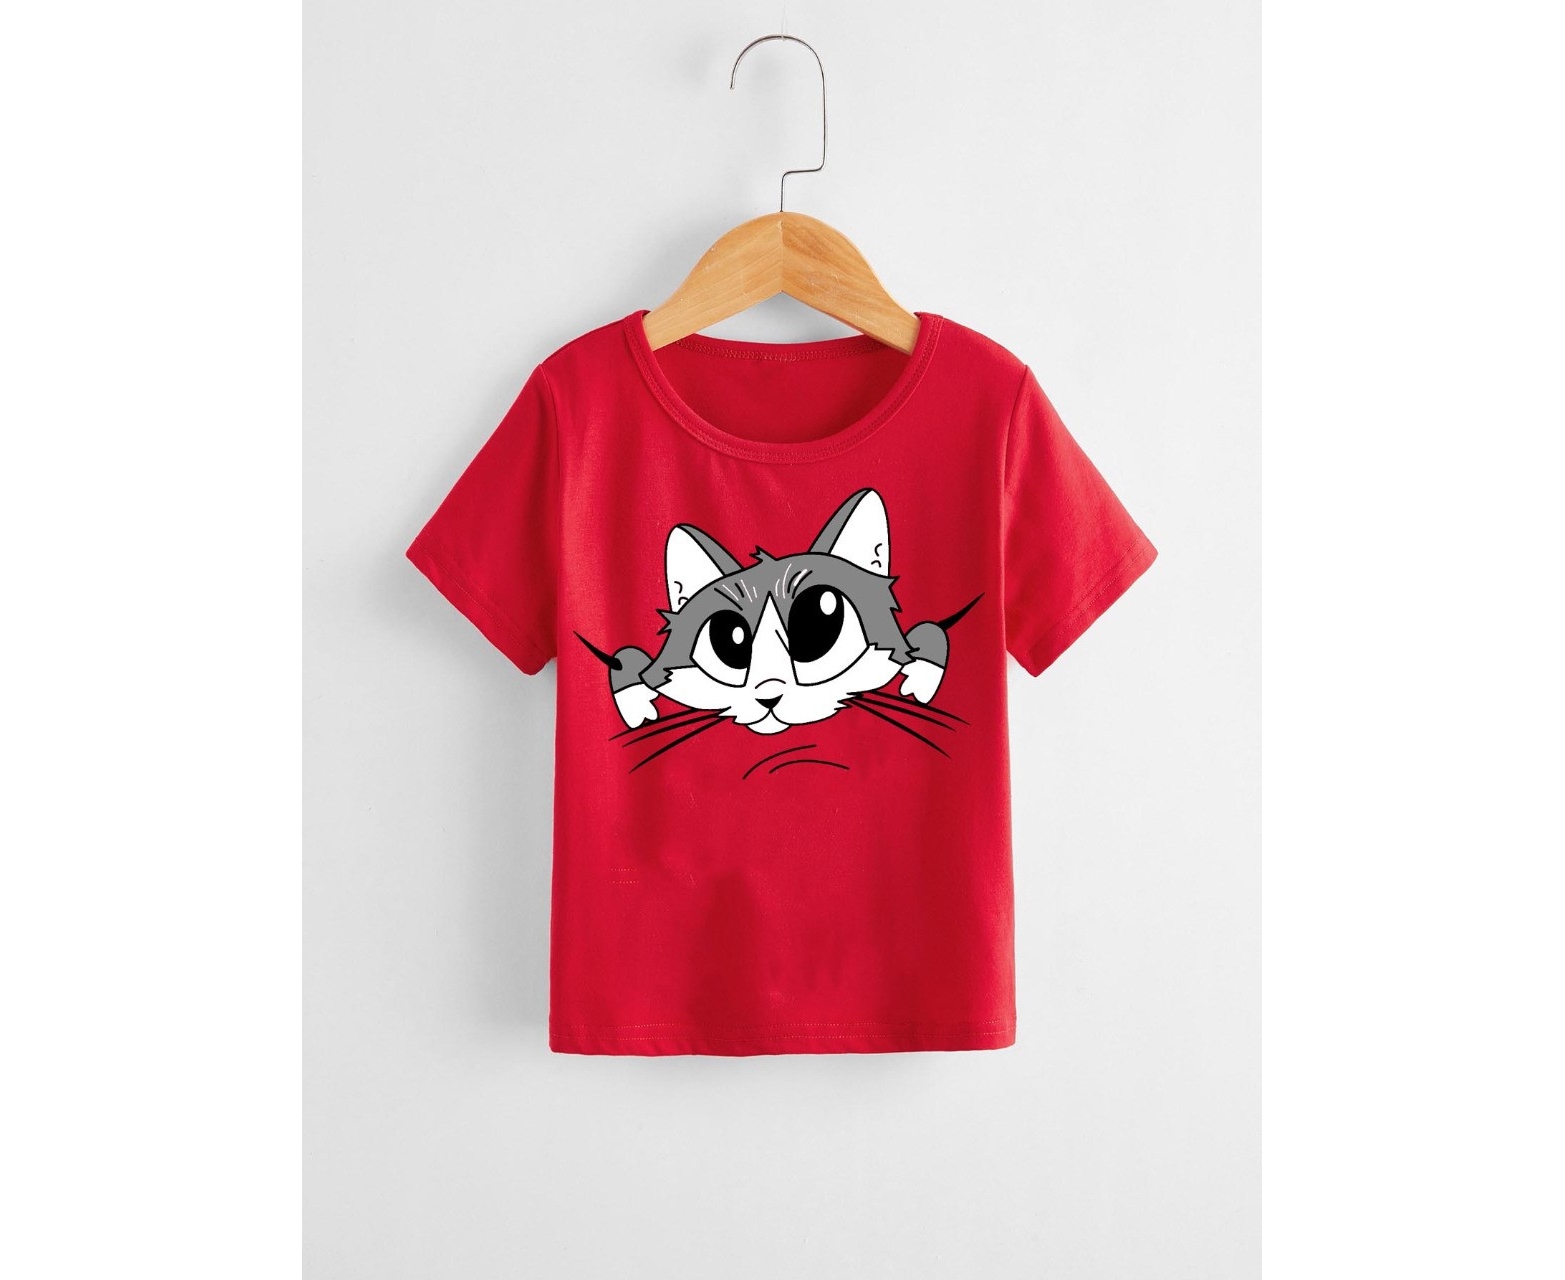 The Best Collection of Stylish Printed T-shirts for Kids 2021